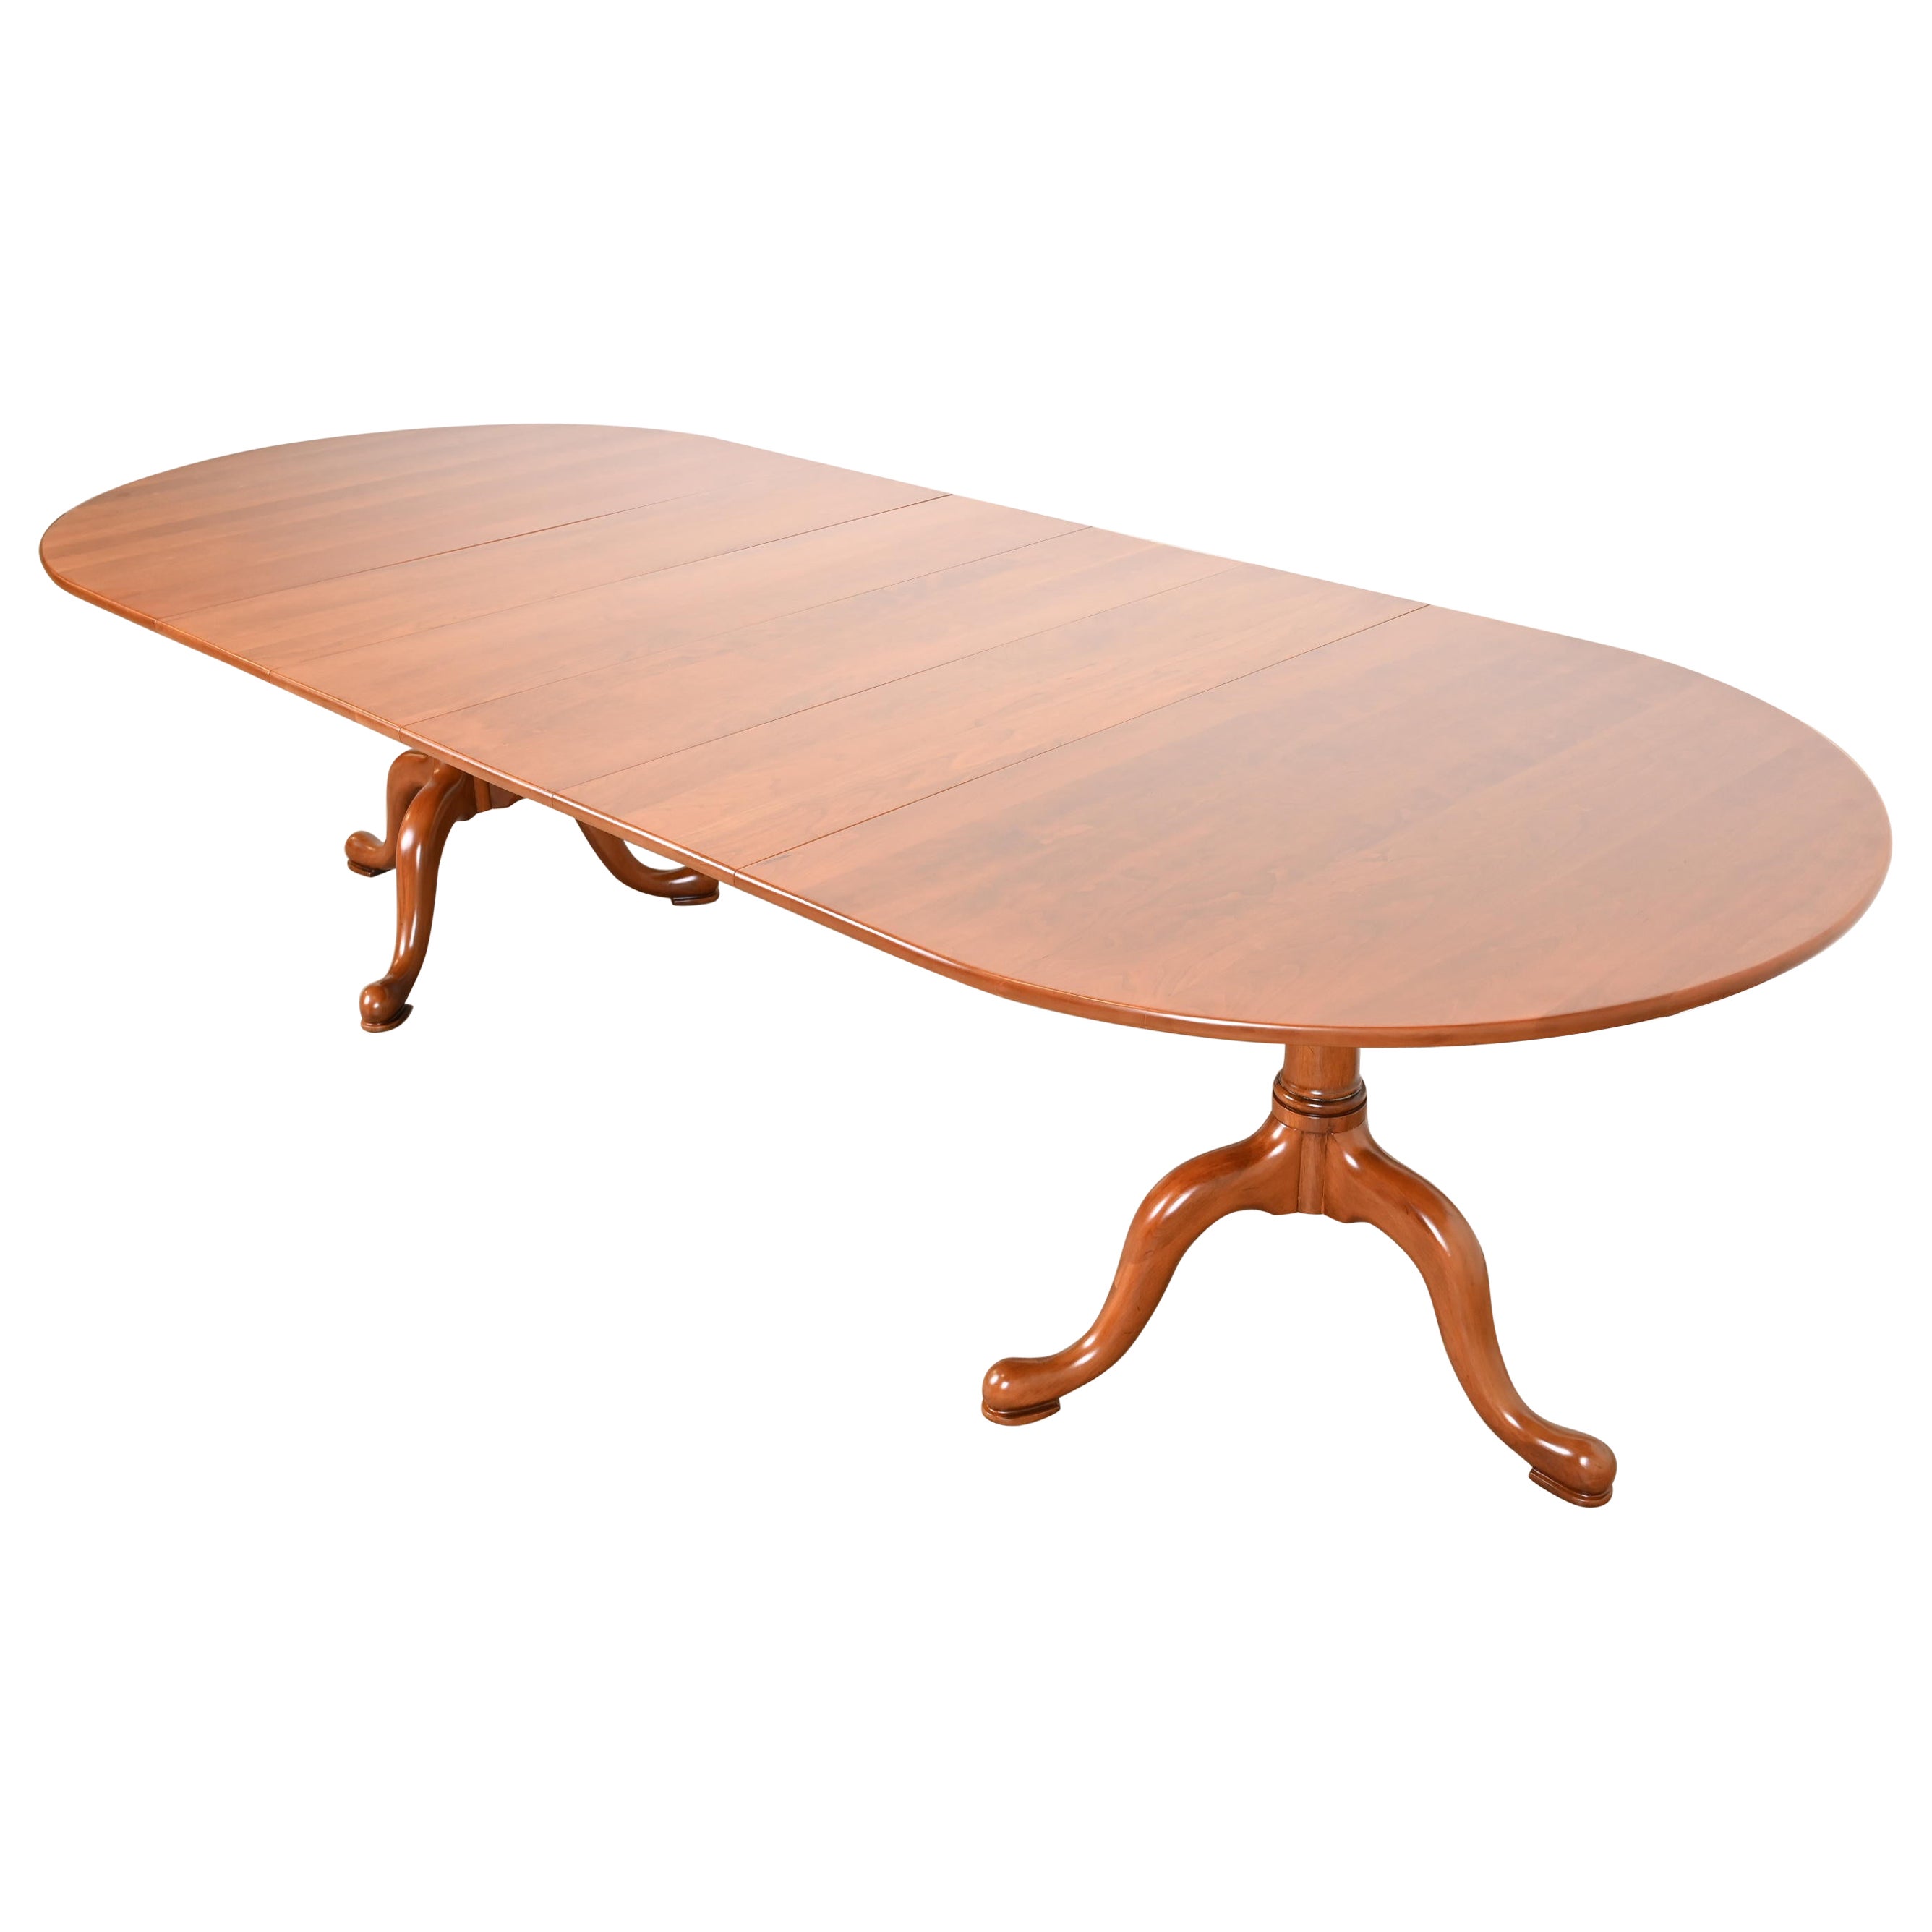 Henkel Harris Georgian Solid Cherry Wood Double Pedestal Extension Dining Table For Sale